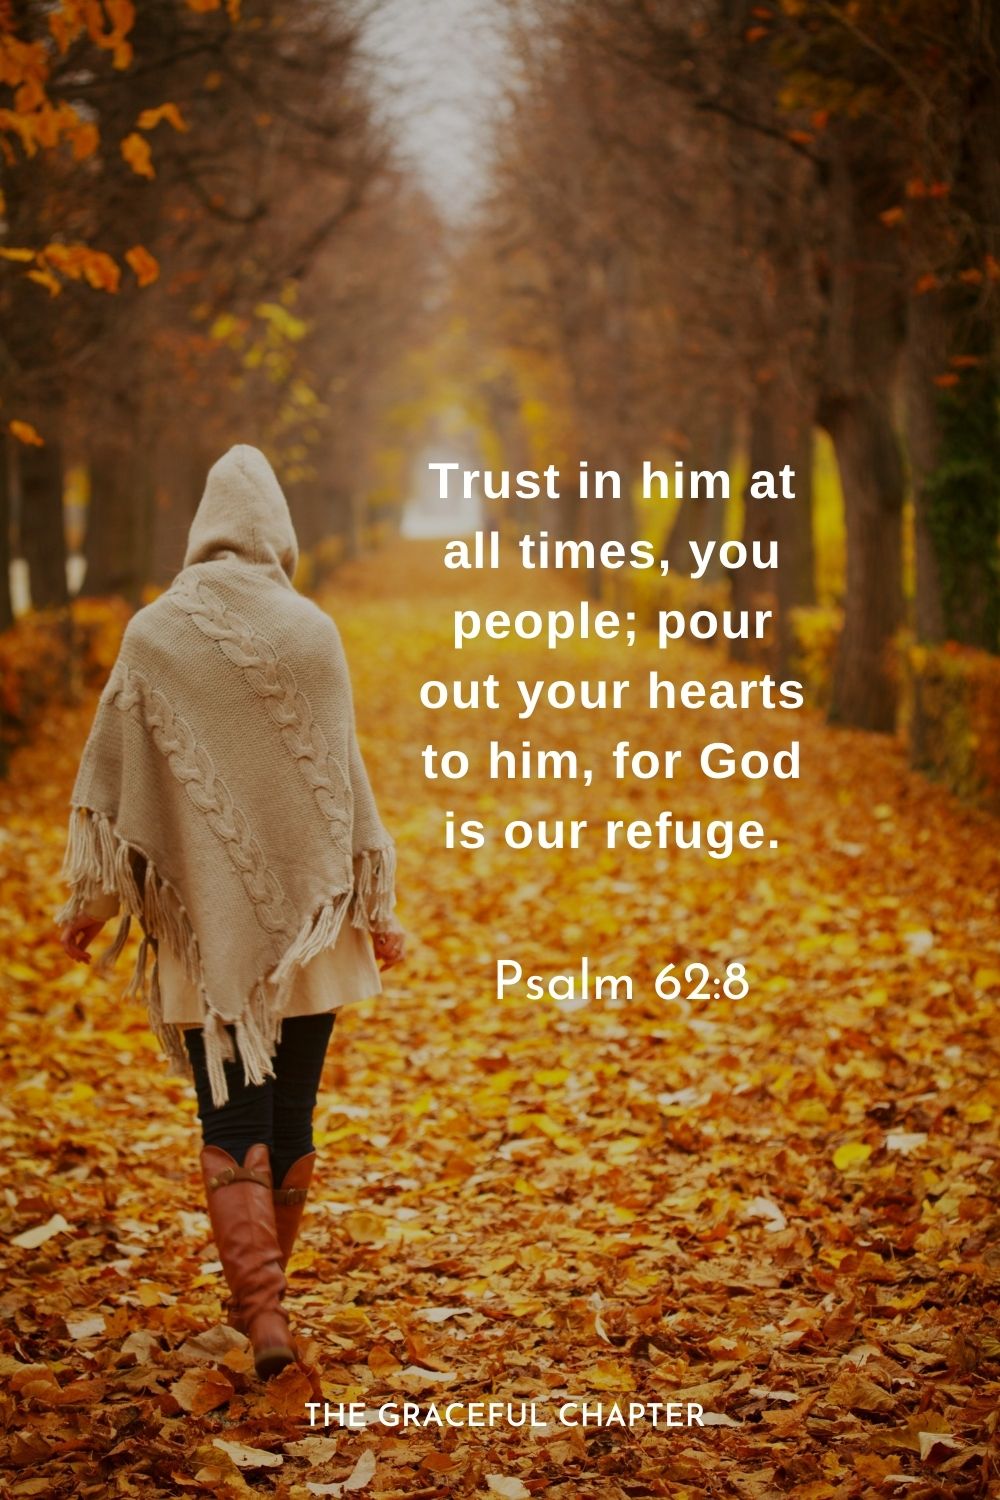 Trust in him at all times, you people; pour out your hearts to him, for God is our refuge.